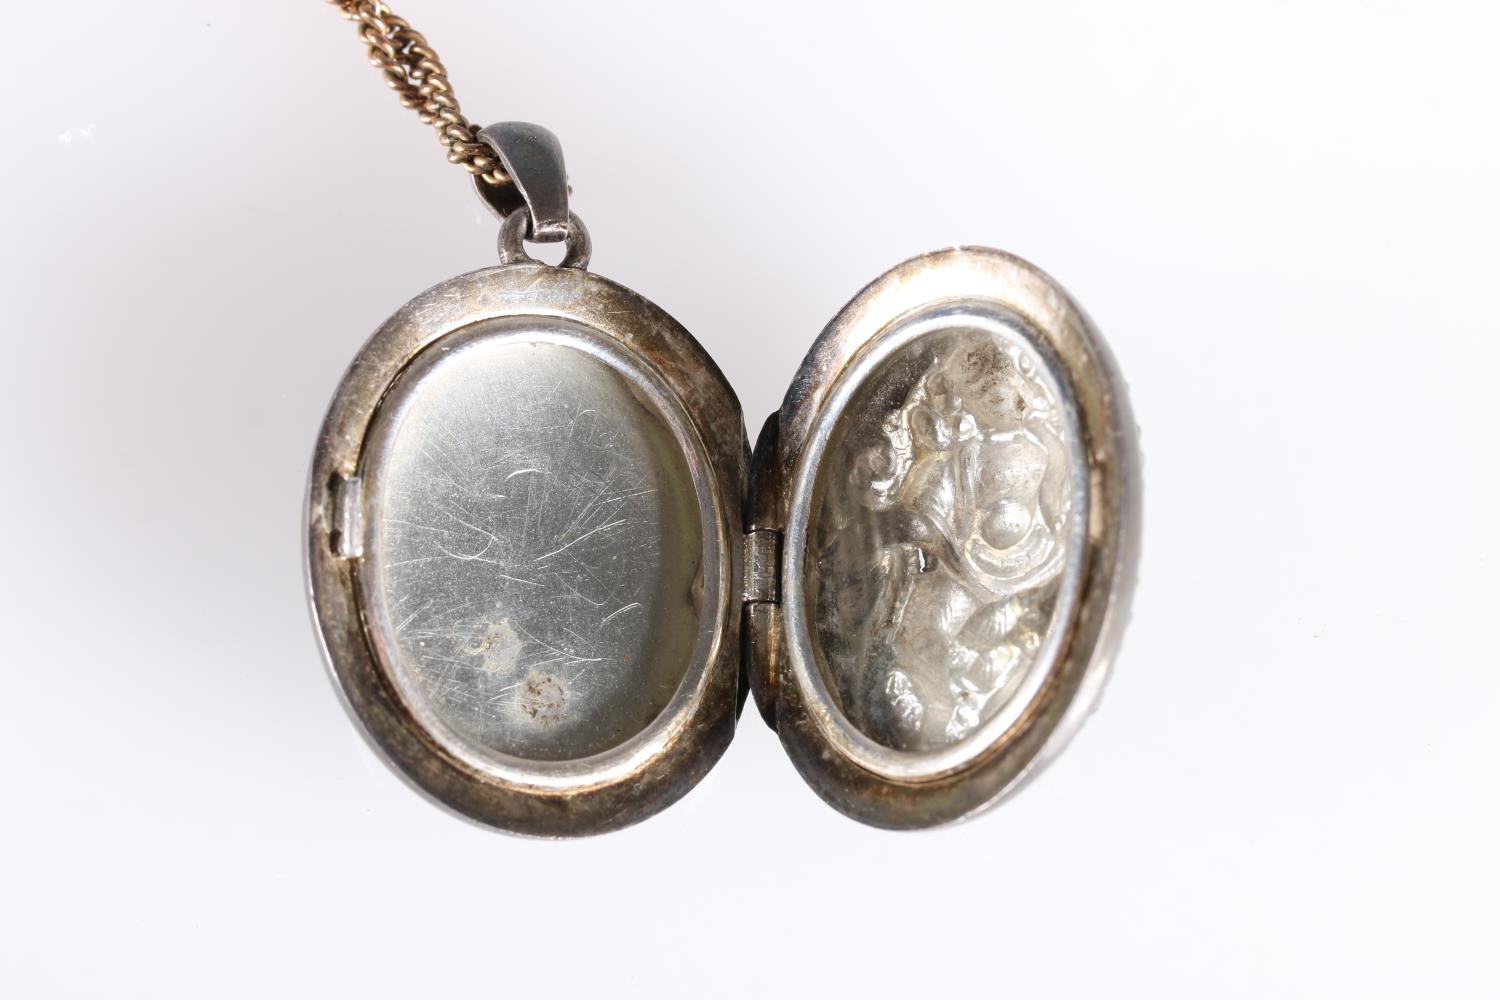 Late 19th early 20th century white metal locket with deity entwined by serpent to front, 3.5cm. - Image 3 of 3